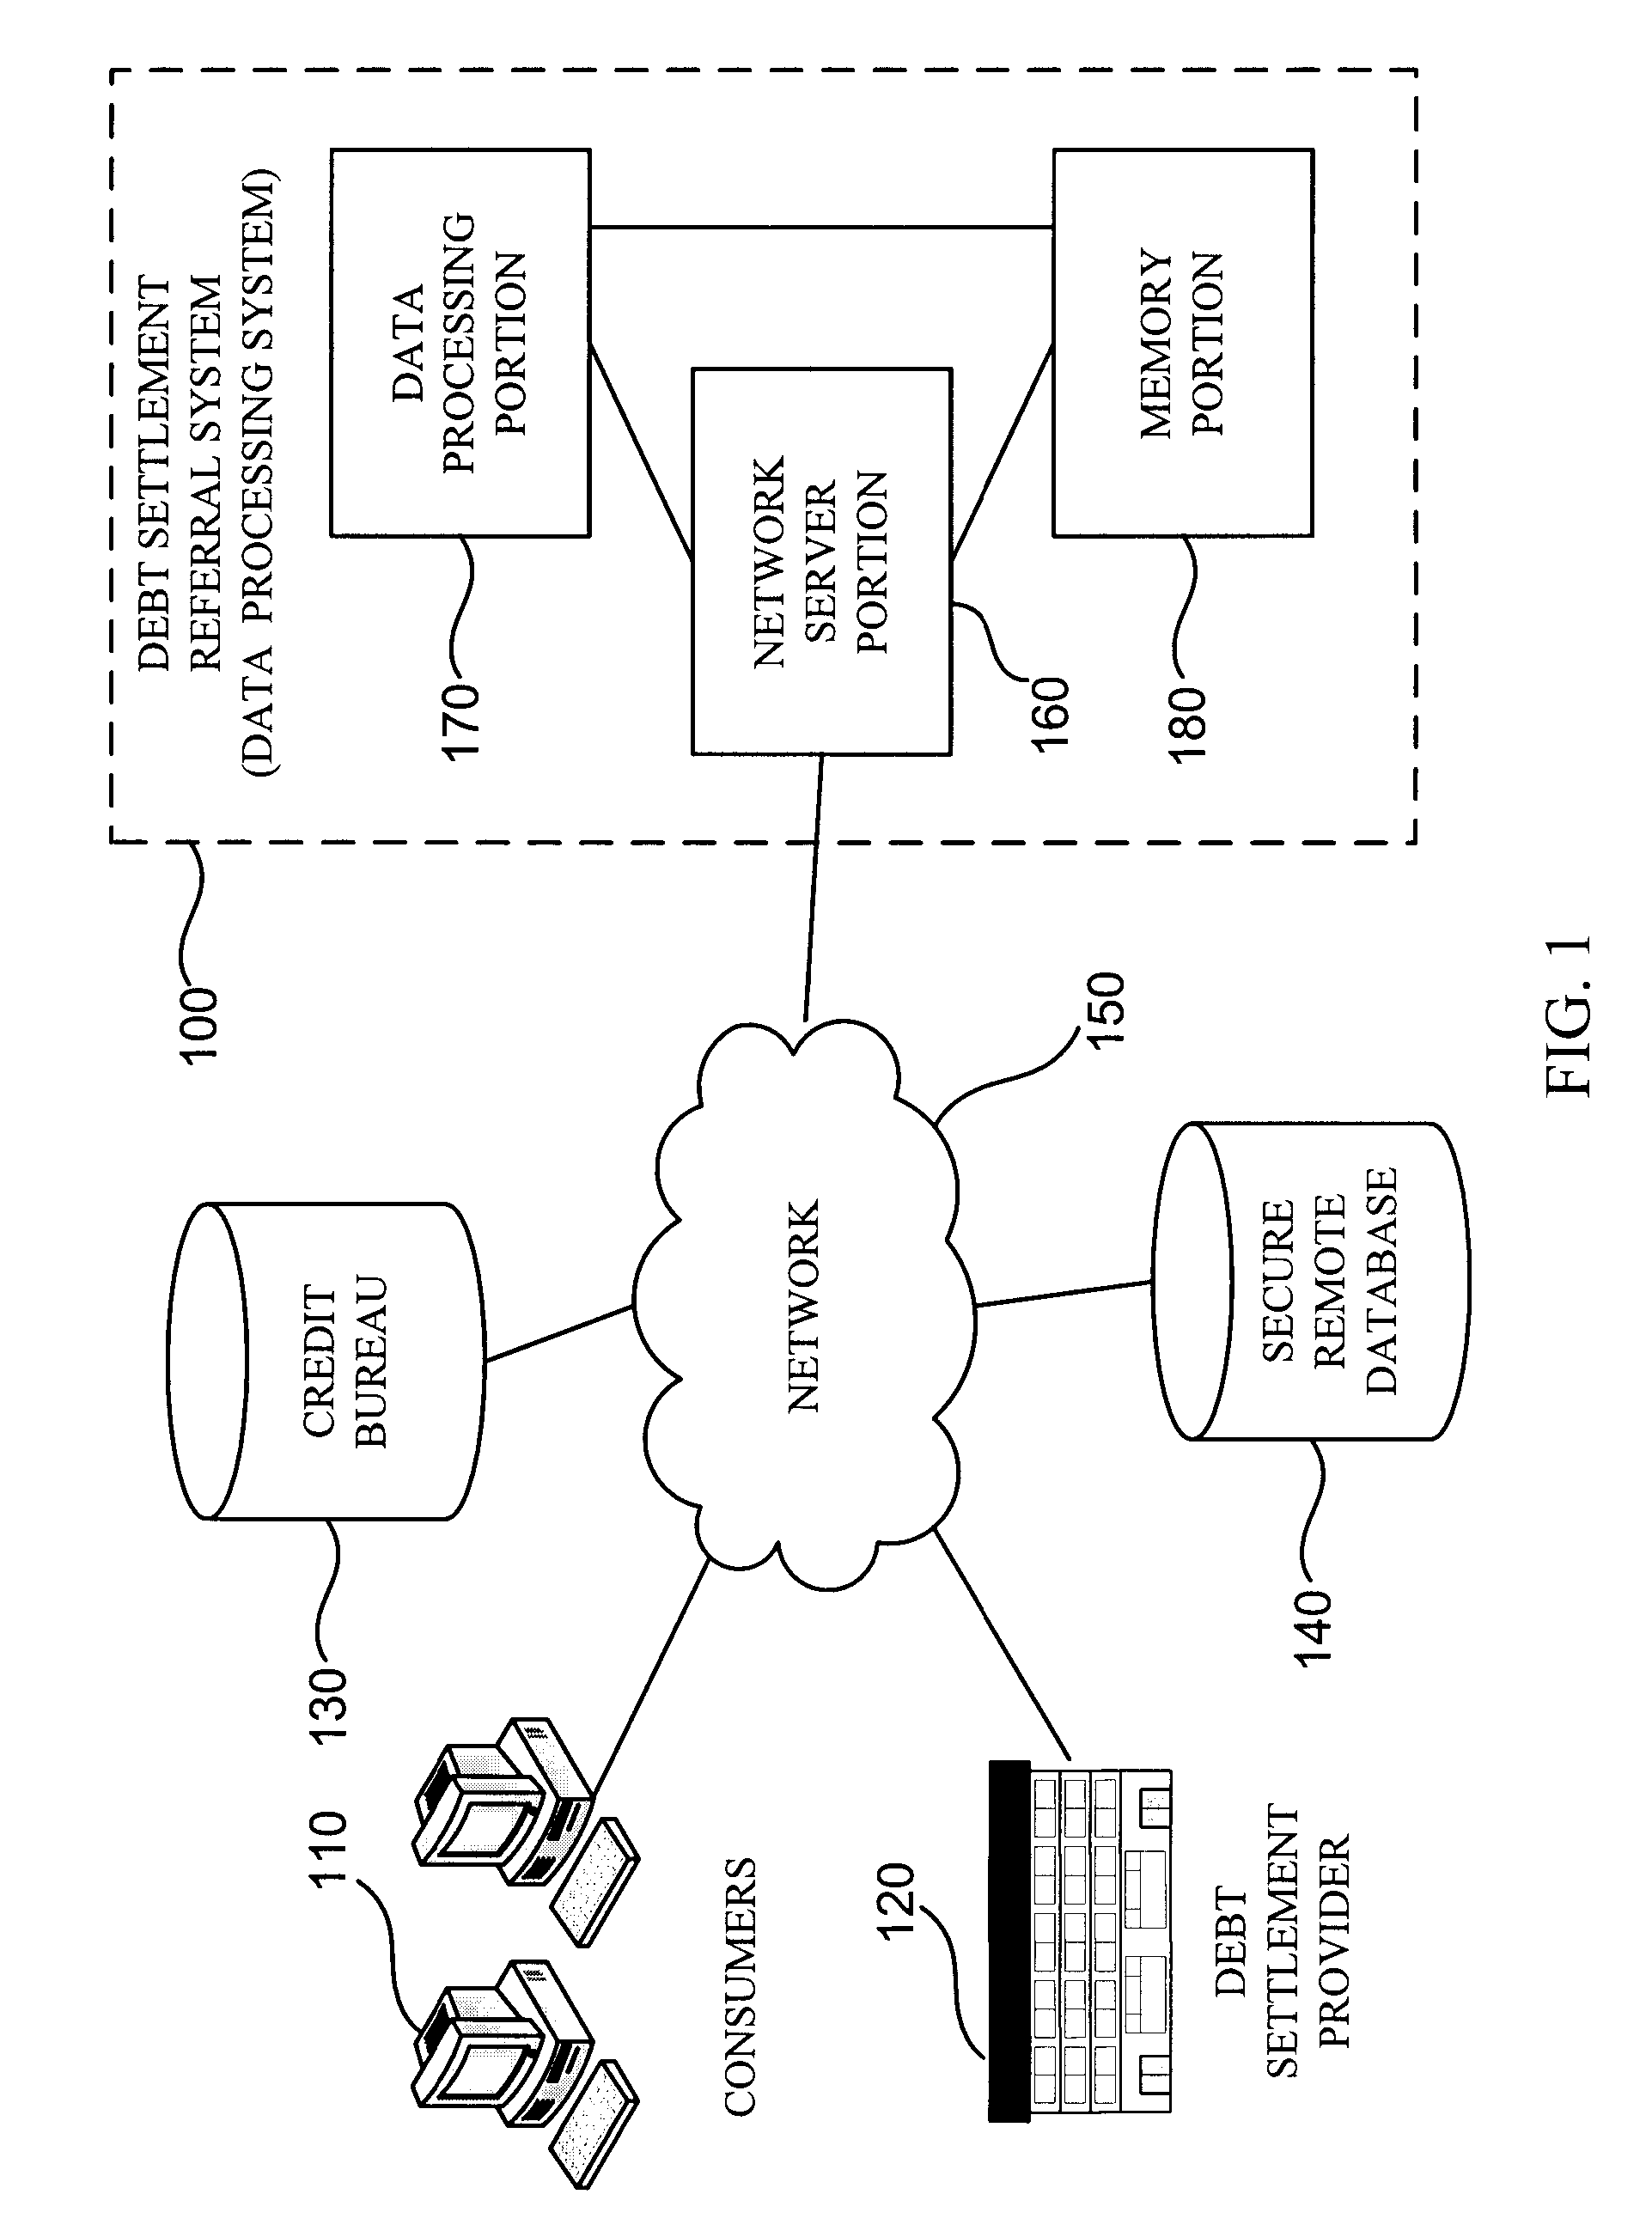 Methods and Apparatus for Directing Consumers to Debt Settlement Providers